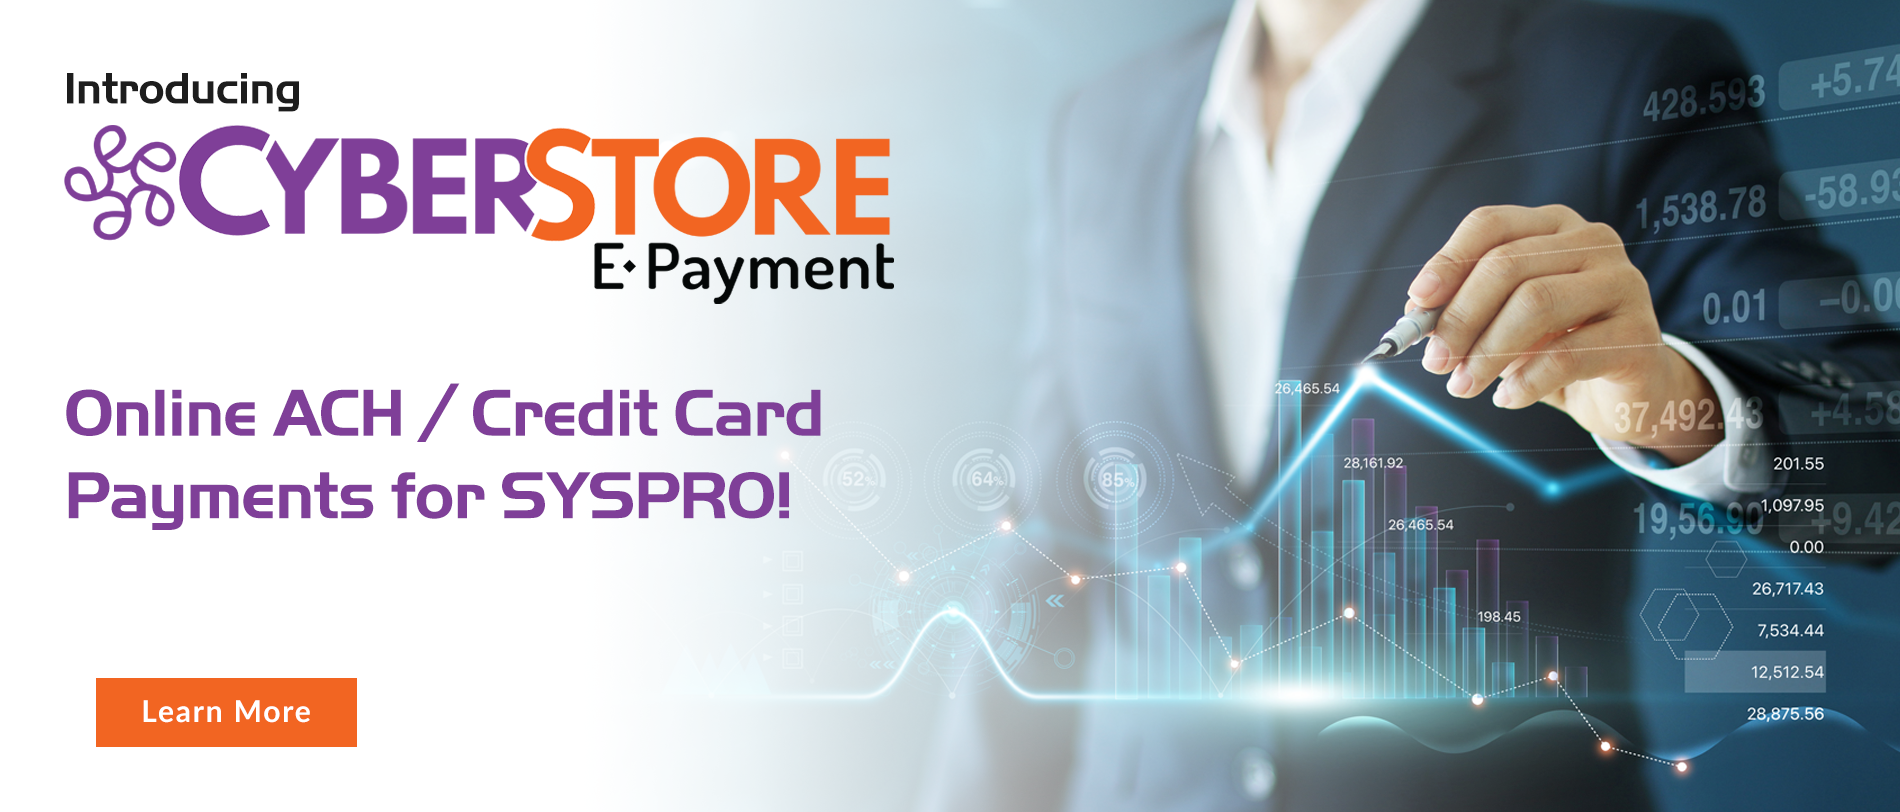 Online ACH and Credit Card Payments for SYSPRO